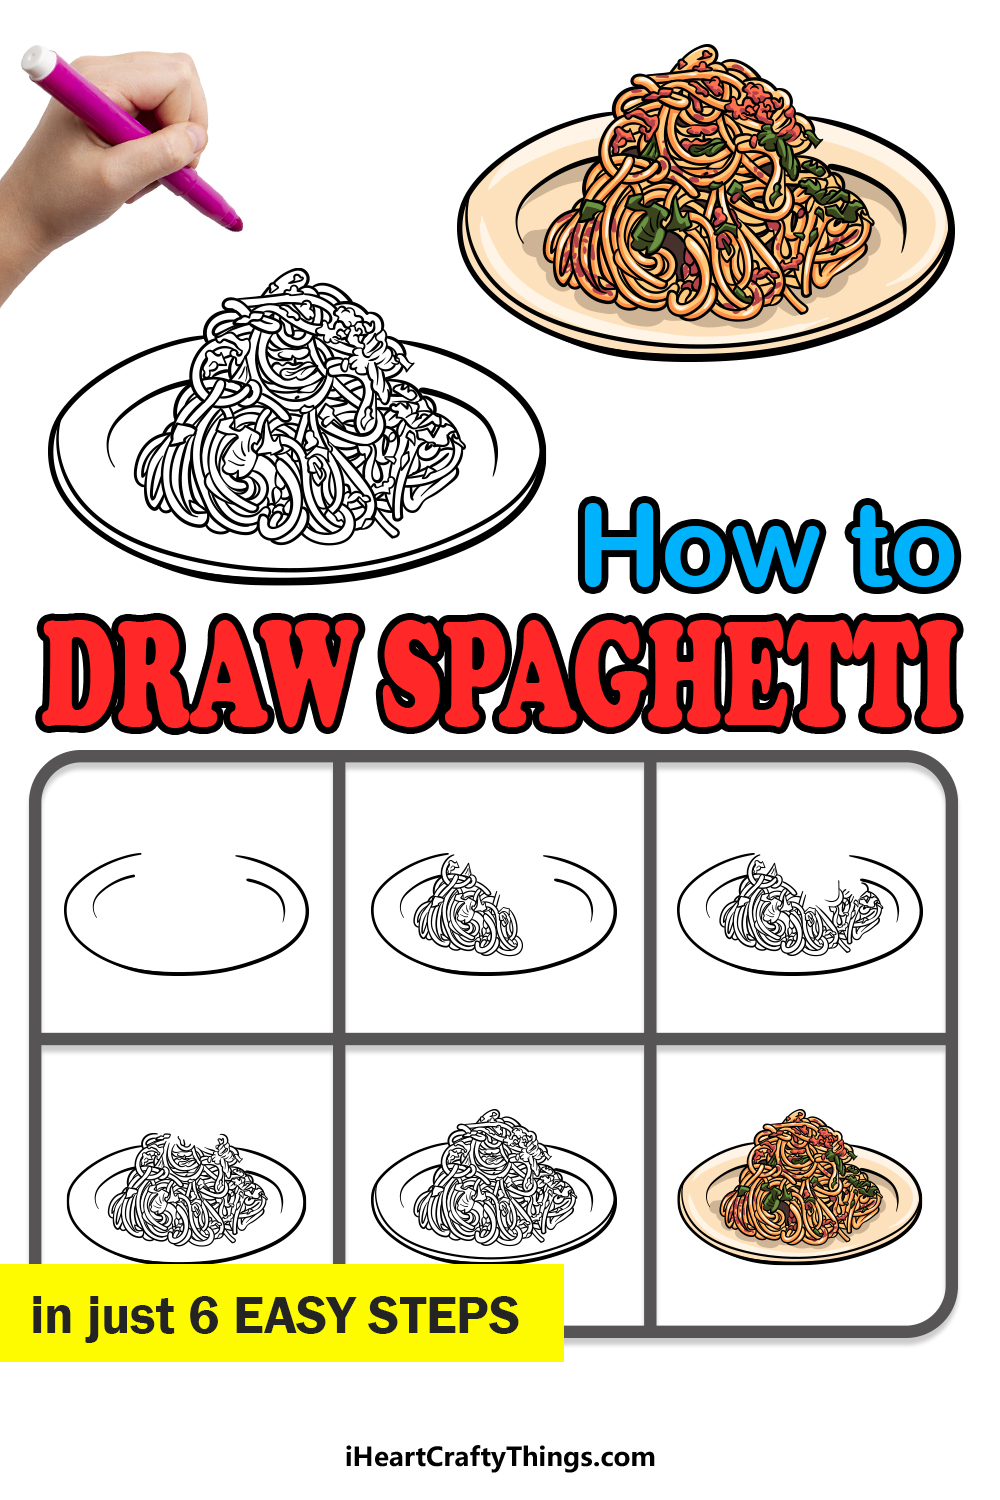 how to draw Spaghetti in 6 easy steps